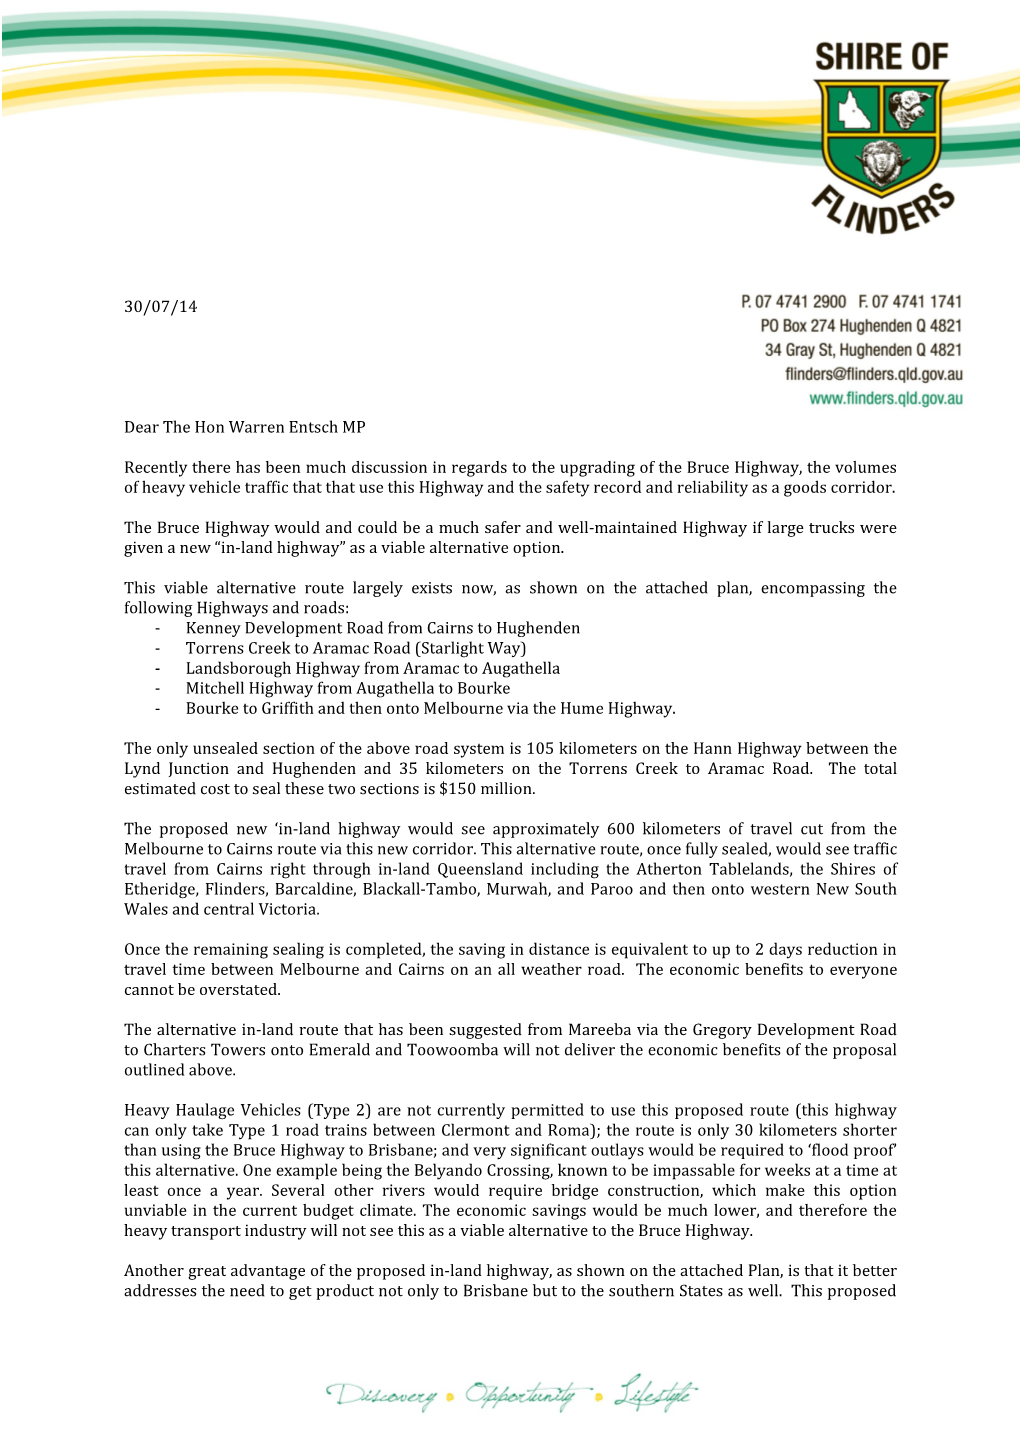 Inquiry Into the Development of Northern Australia Submission 12